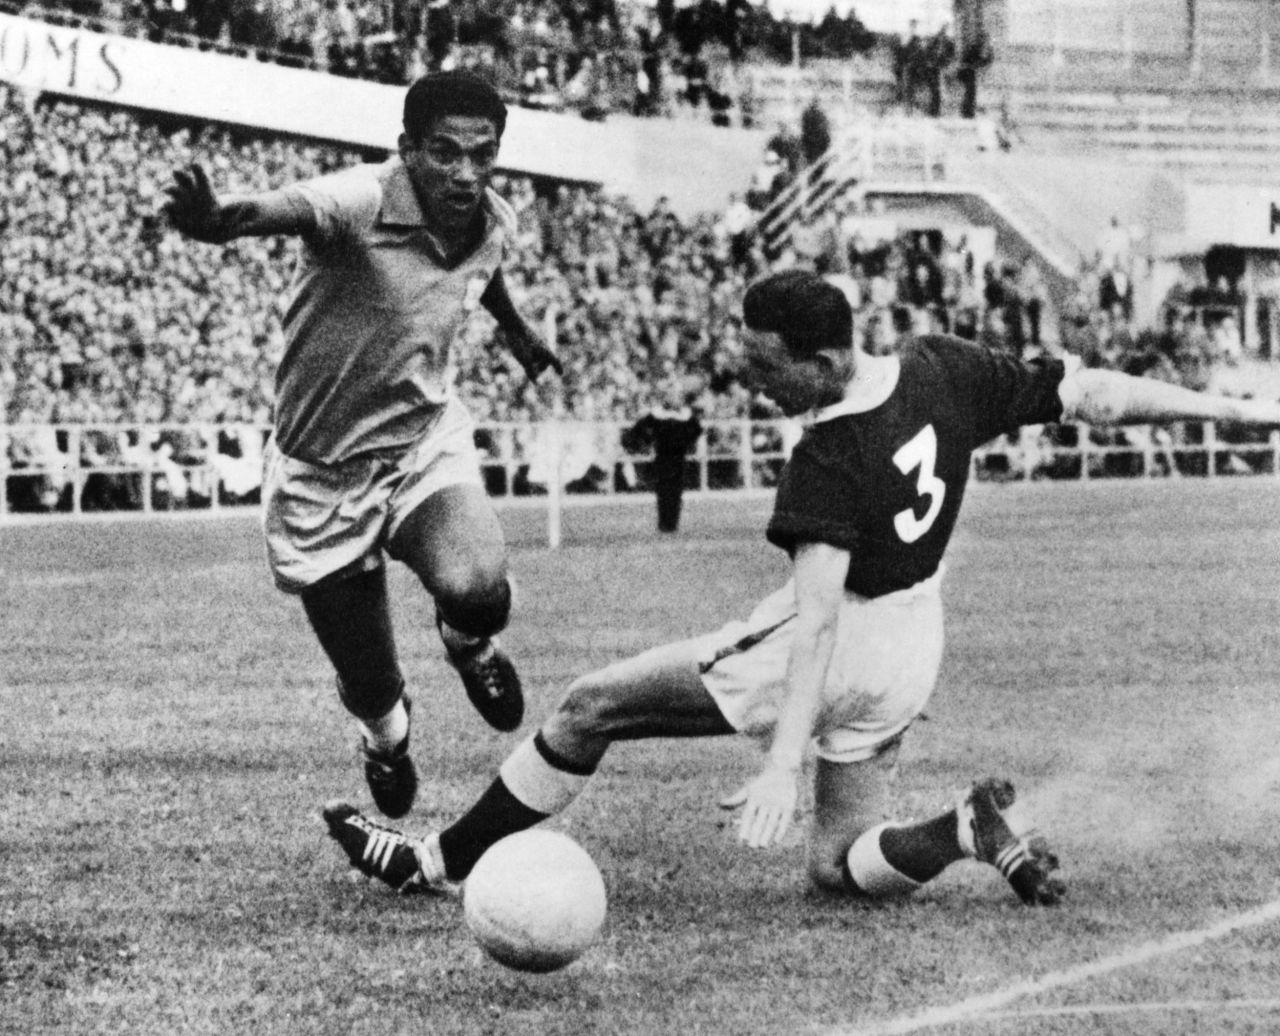 Most football fans would say Argentina's Diego Maradona is the only player who can rival Pele for the title of greatest ever. In Brazil, however, Garrincha is regarded as the only player who comes close to the great man. The tricky winger was a key part of Brazil's World Cup triumphs in 1958 and 1962. Sadly,  Garrincha struggled with alcohol problems and died of liver cirrhosis aged 49.